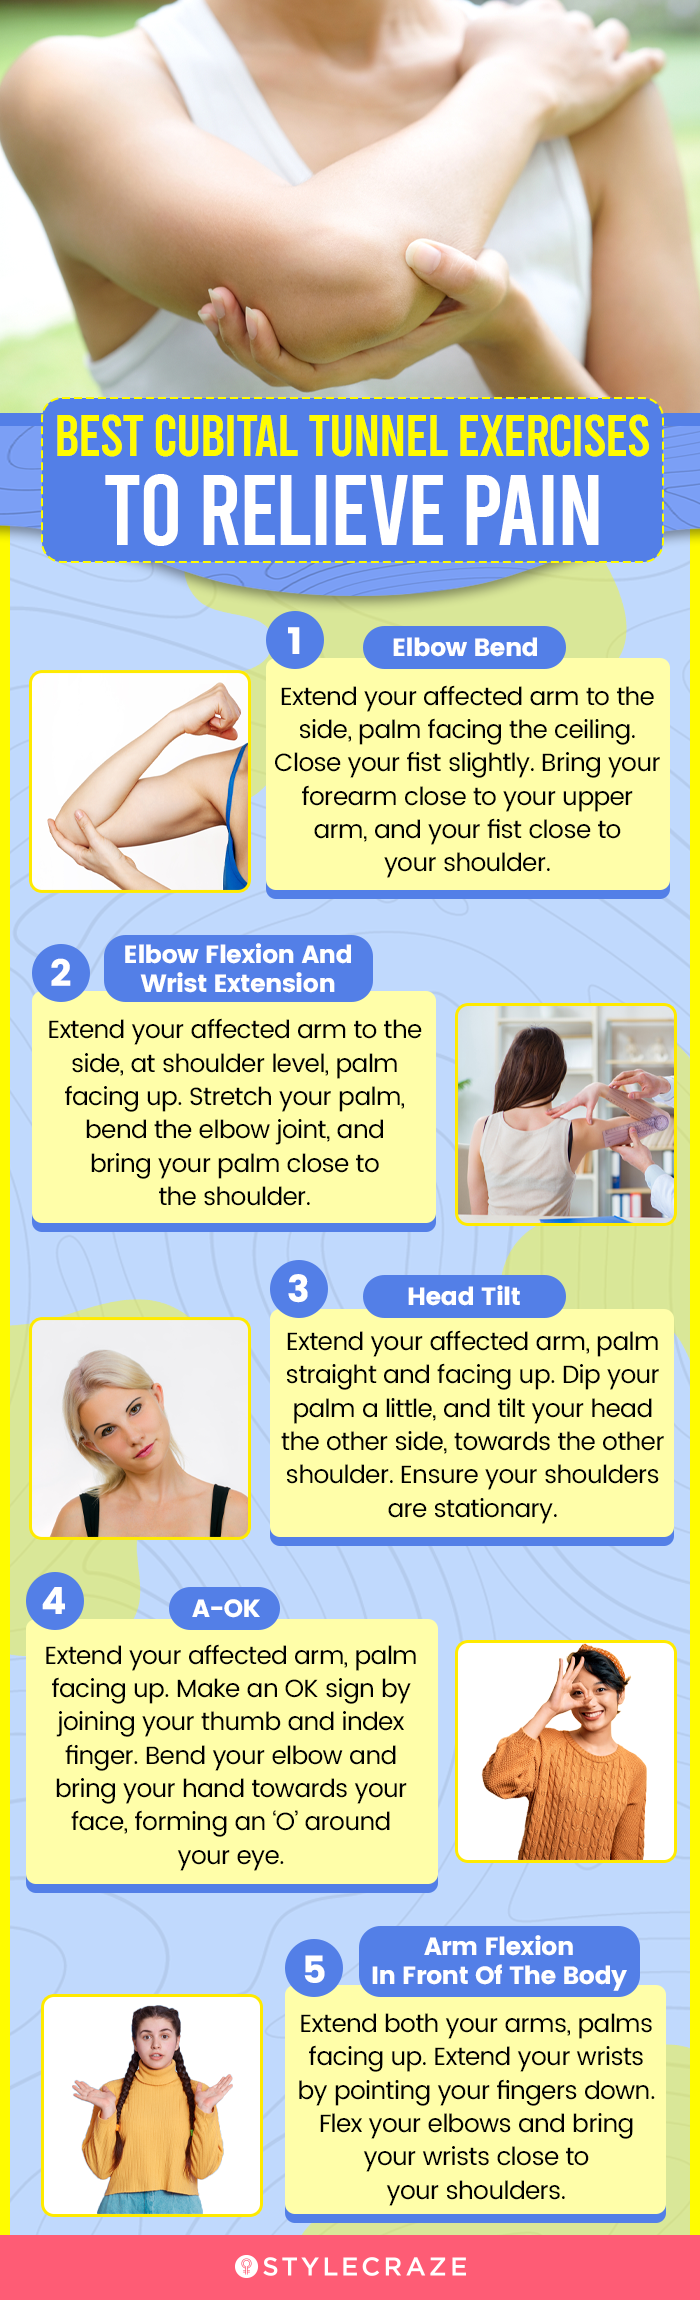 best cubital tunnel exercises to relieve pain (infographic)